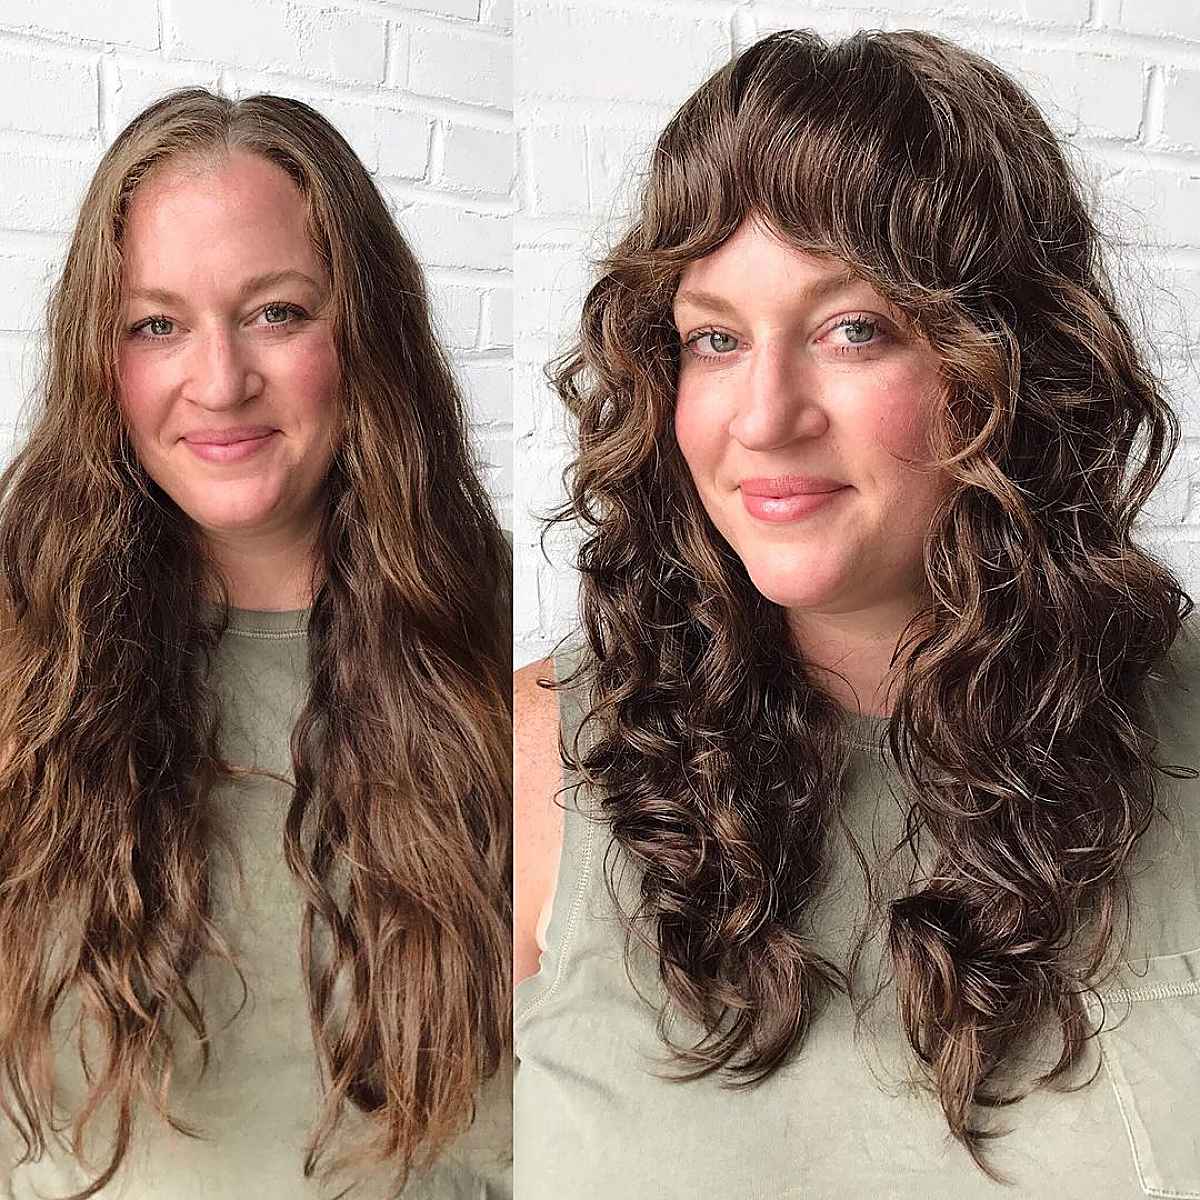 Long curly hair with fringe